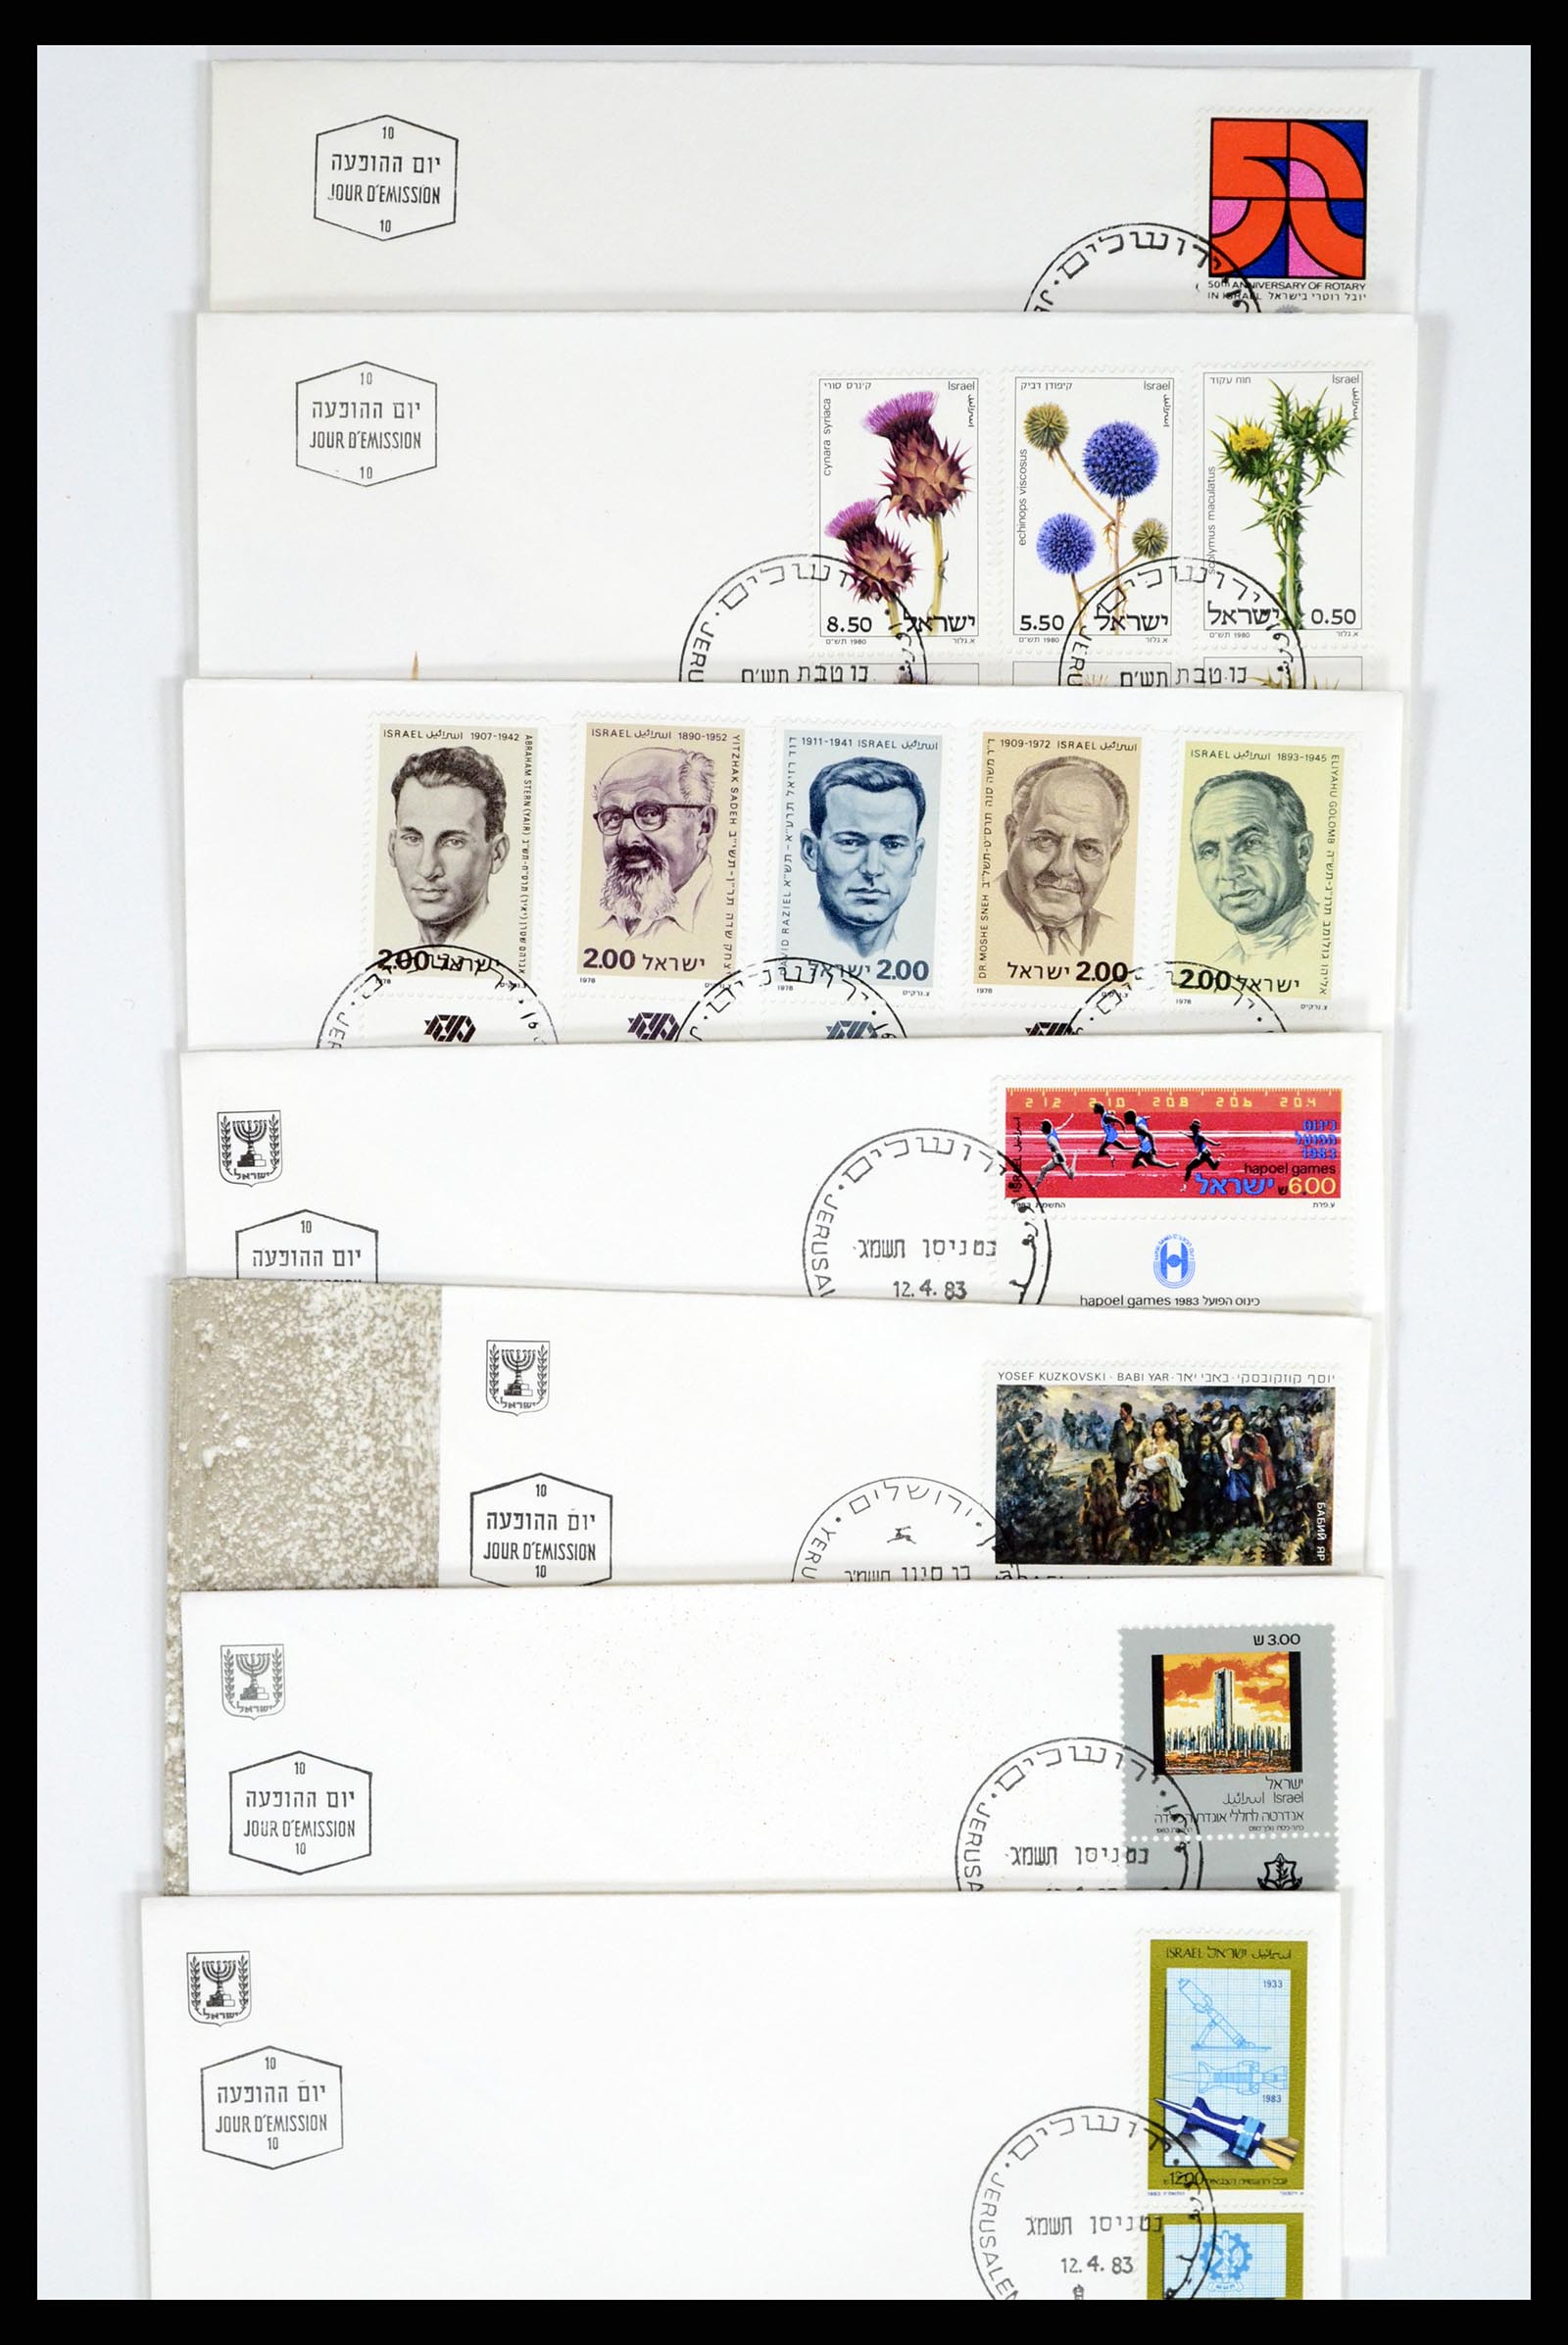 37711 042 - Stamp collection 37711 Israel first day covers 1970-2000.